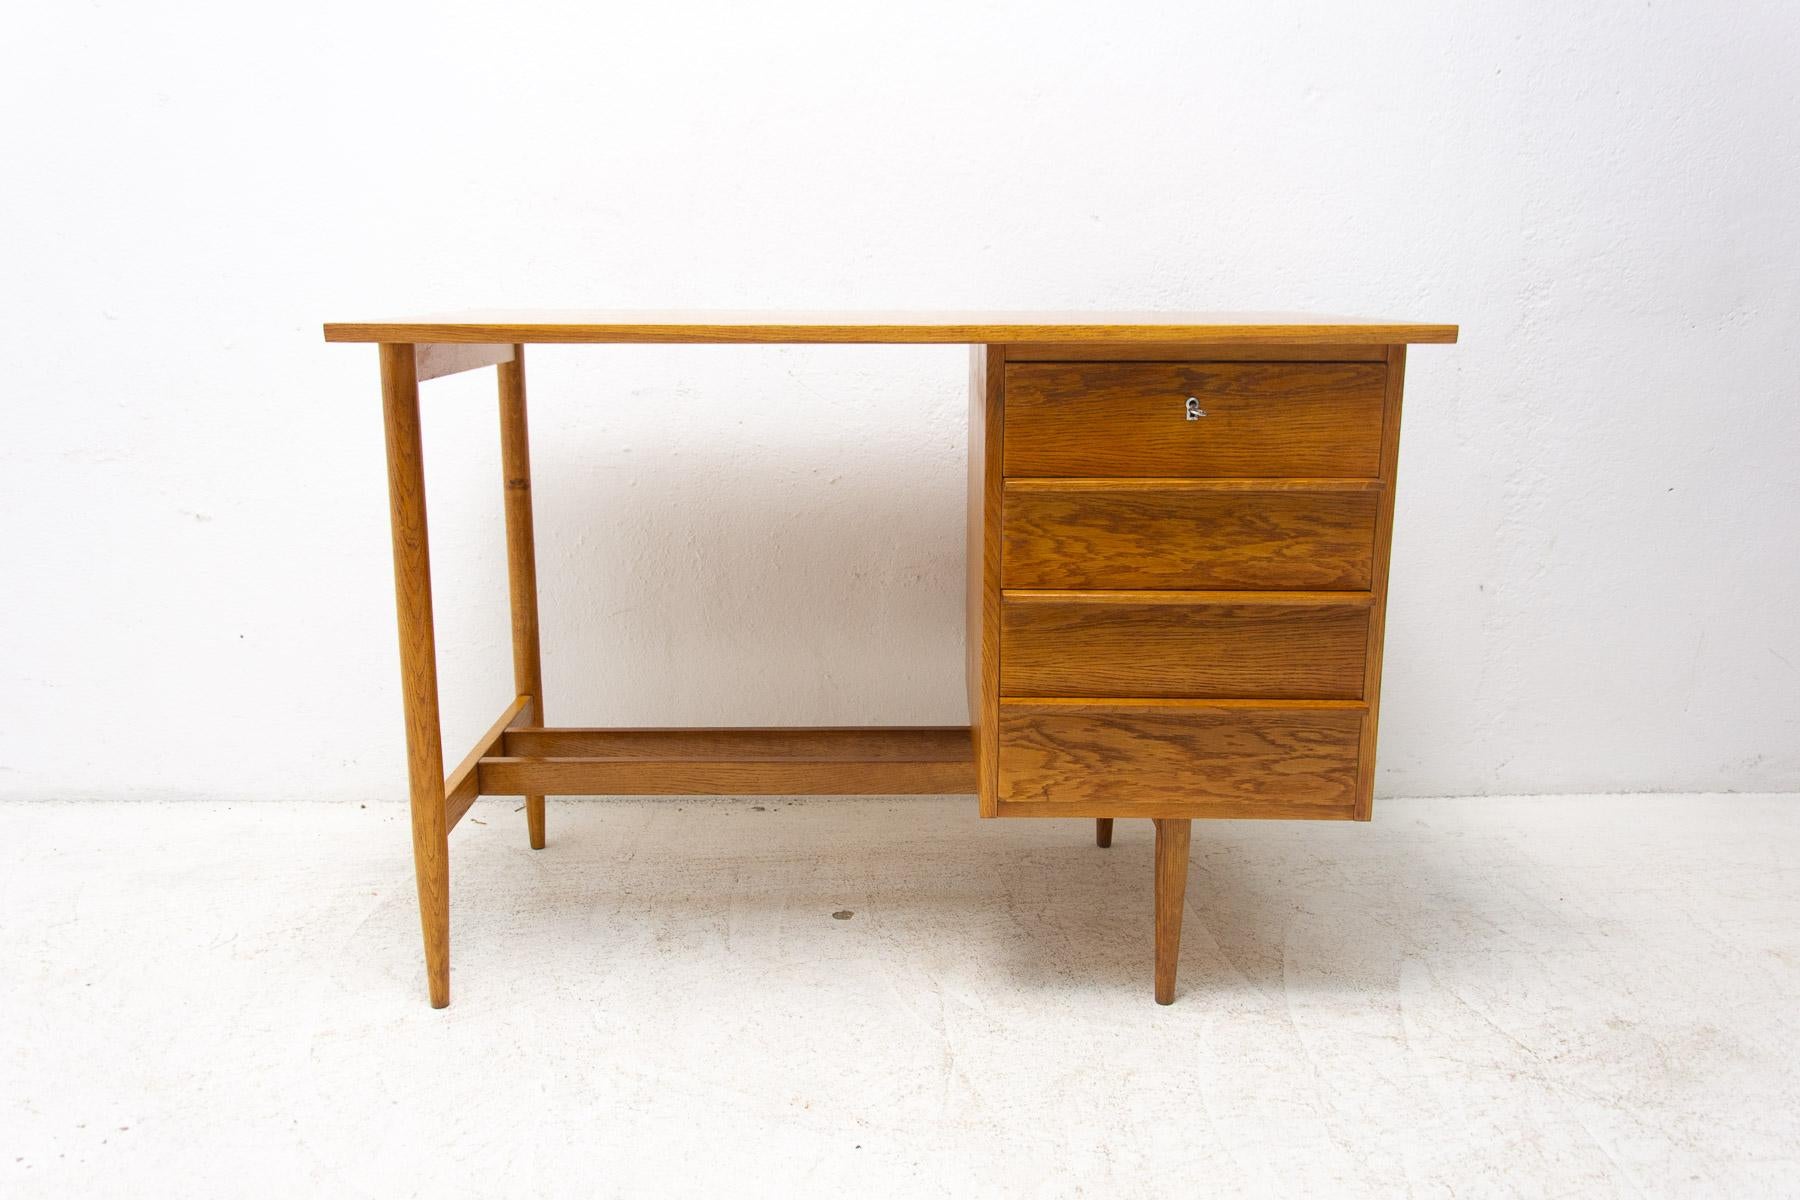 This ladies writing desk was made in the former Czechoslovakia in the 1960´s.

It's made of beech wood. Plastic drawers inside.

Very simple design. In excellent condition, fully renovated.

Dimensions:

length: 110 cm, height: 75 cm, depth: 60 cm.